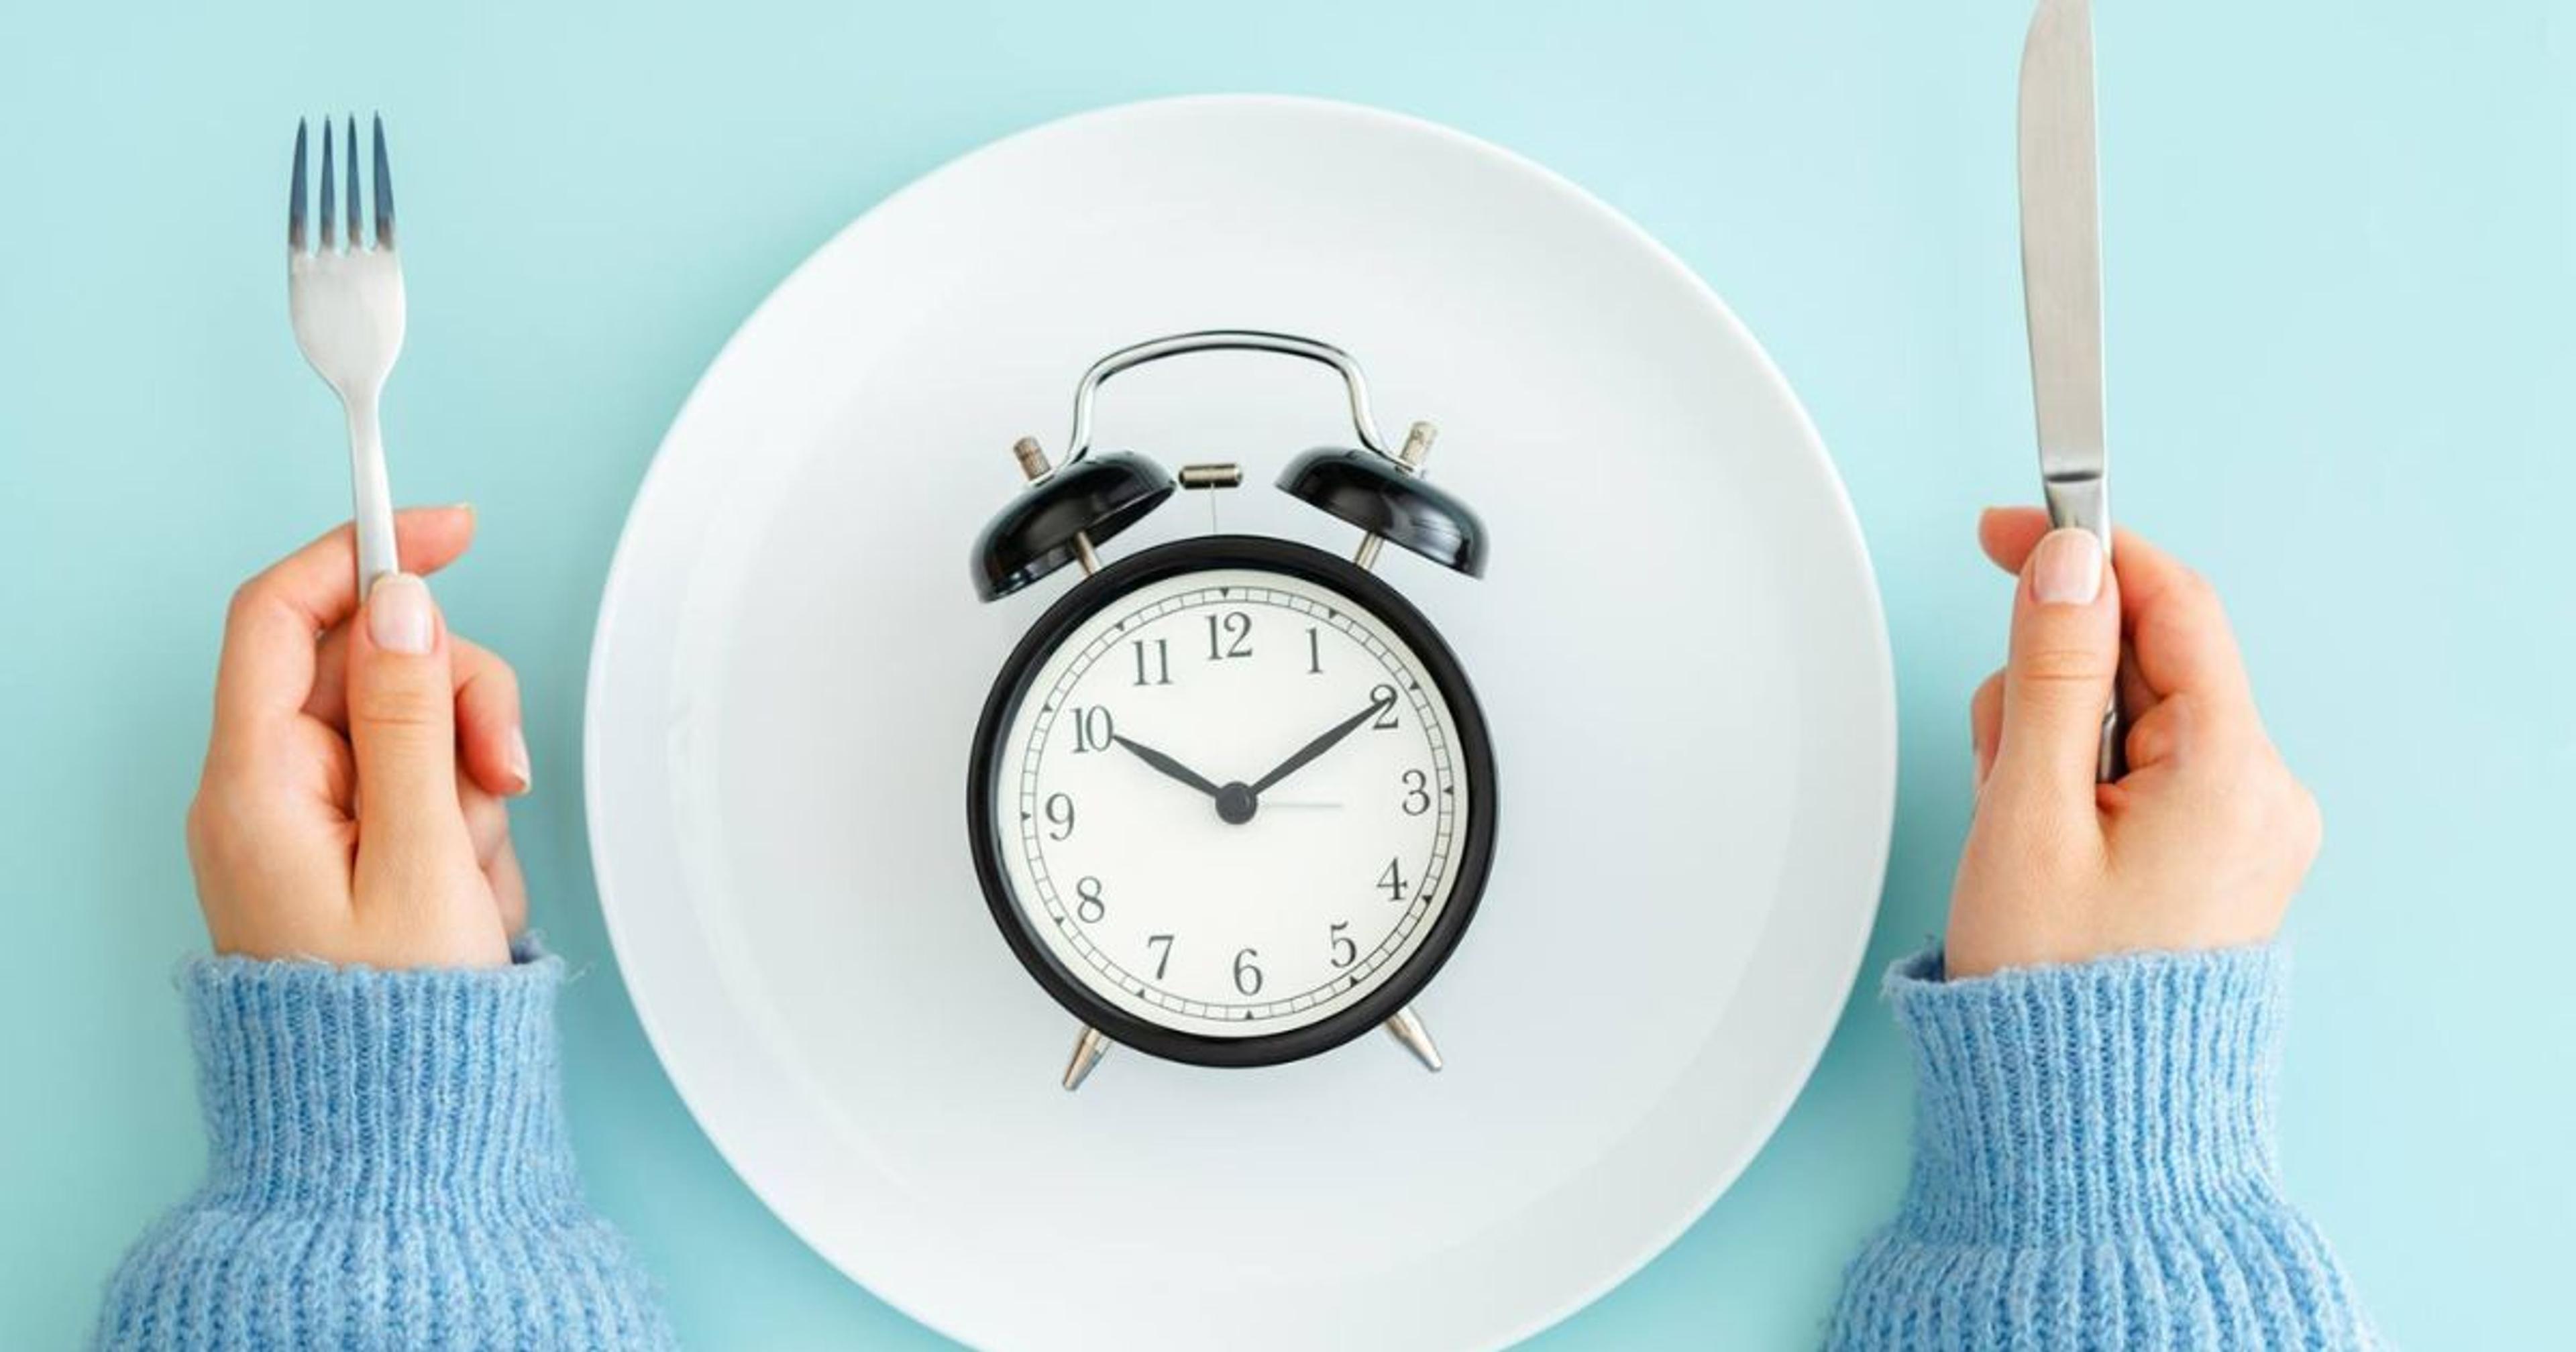 What is Intermittent Fasting and Is It Good For You? The Benefits of Slow-Carb Dieting Explained